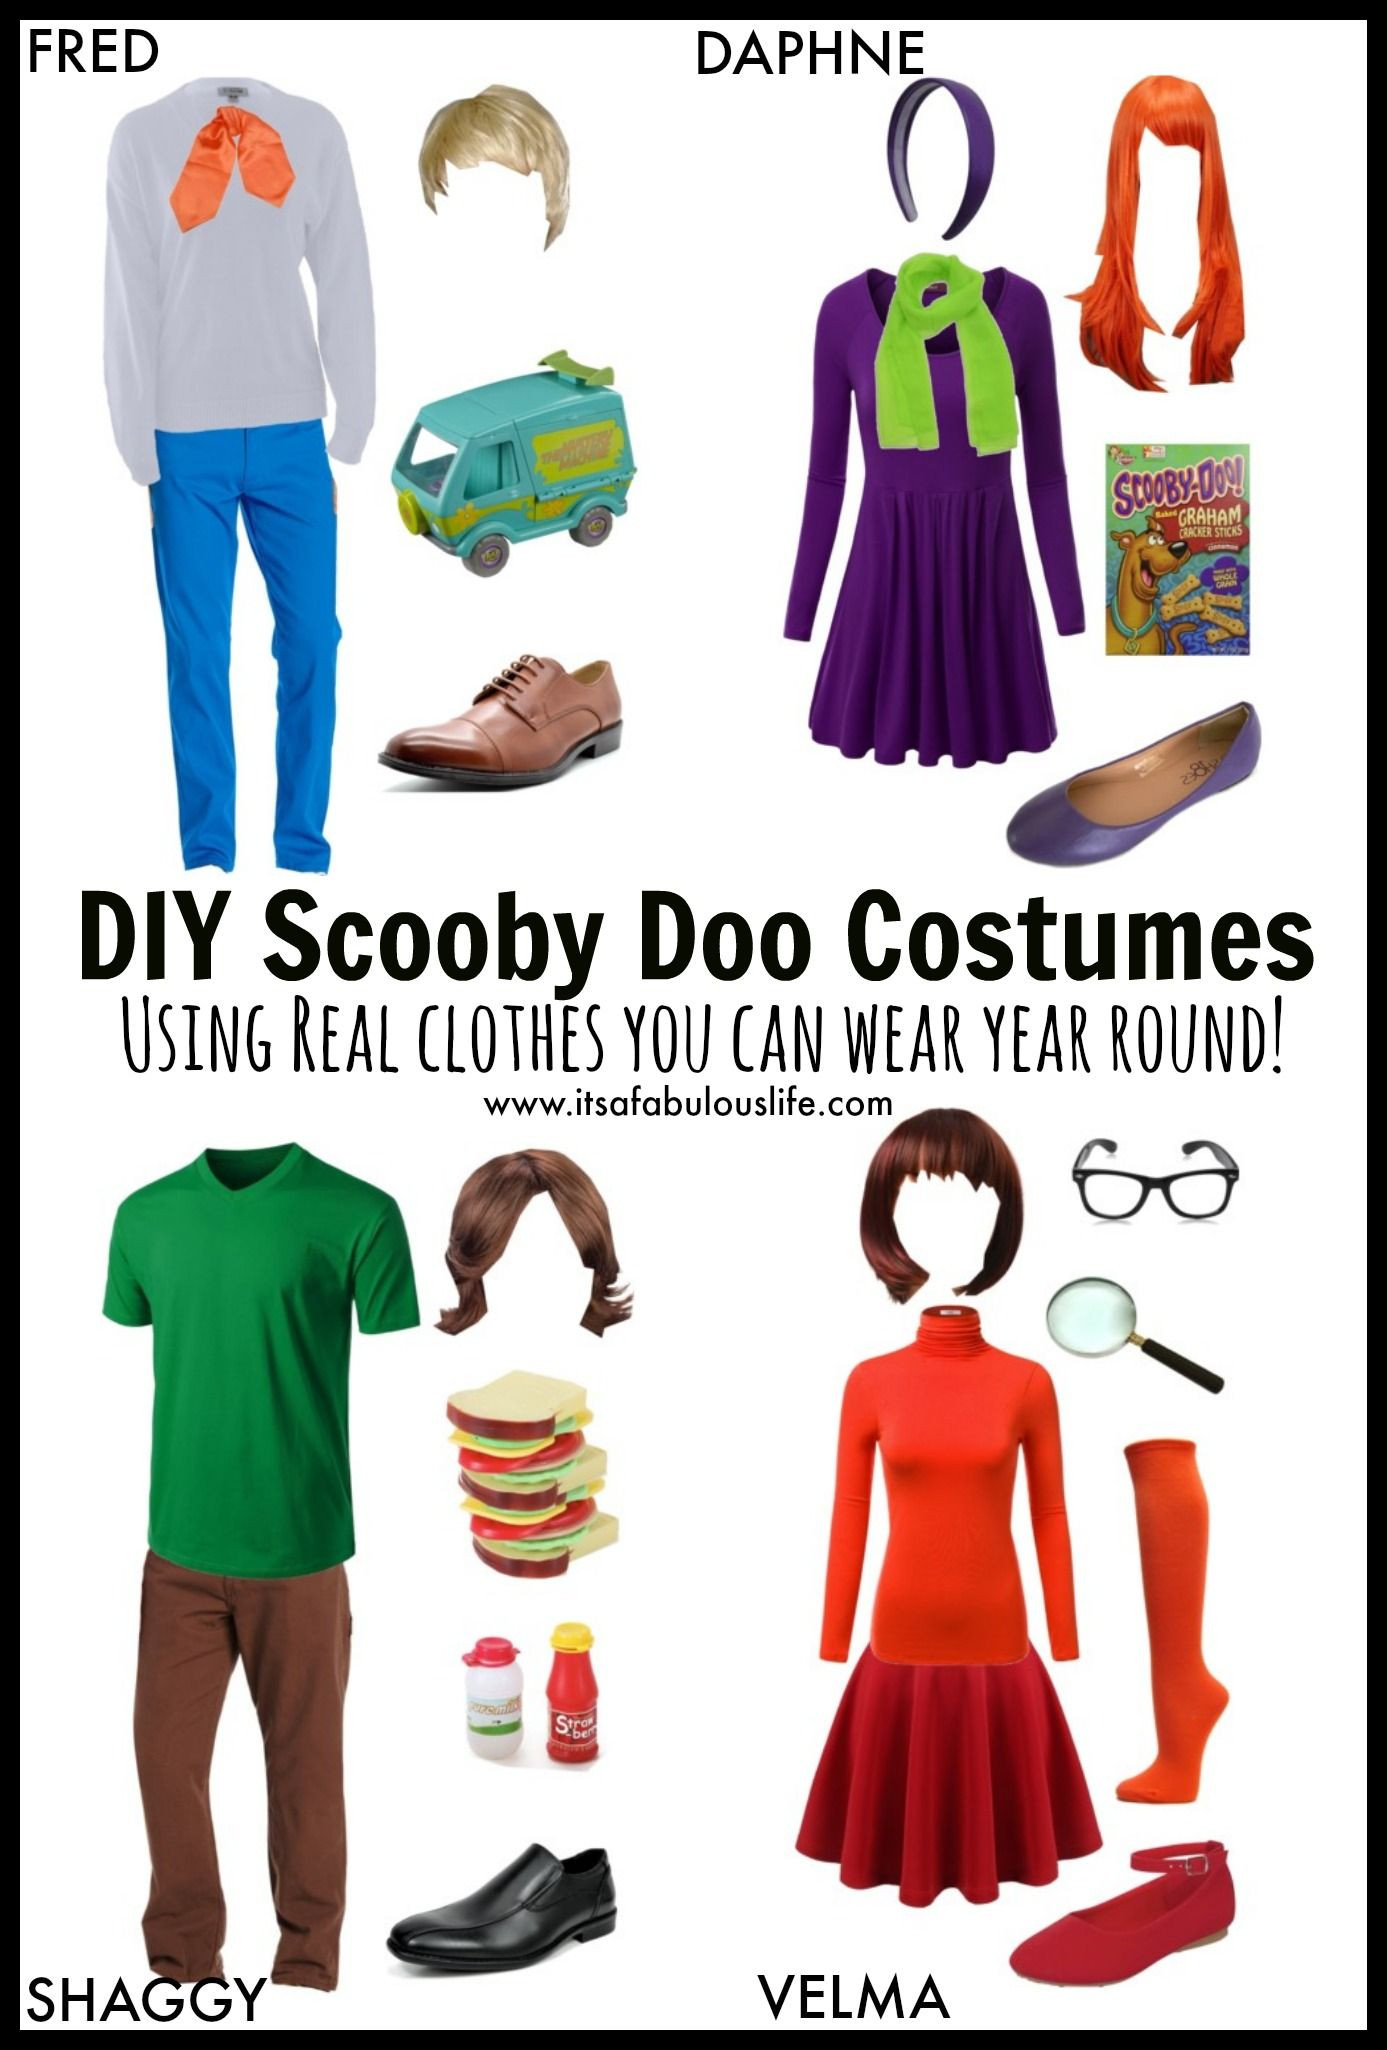 Scooby Doo Costume DIY
 Costumes Using Everyday Clothes